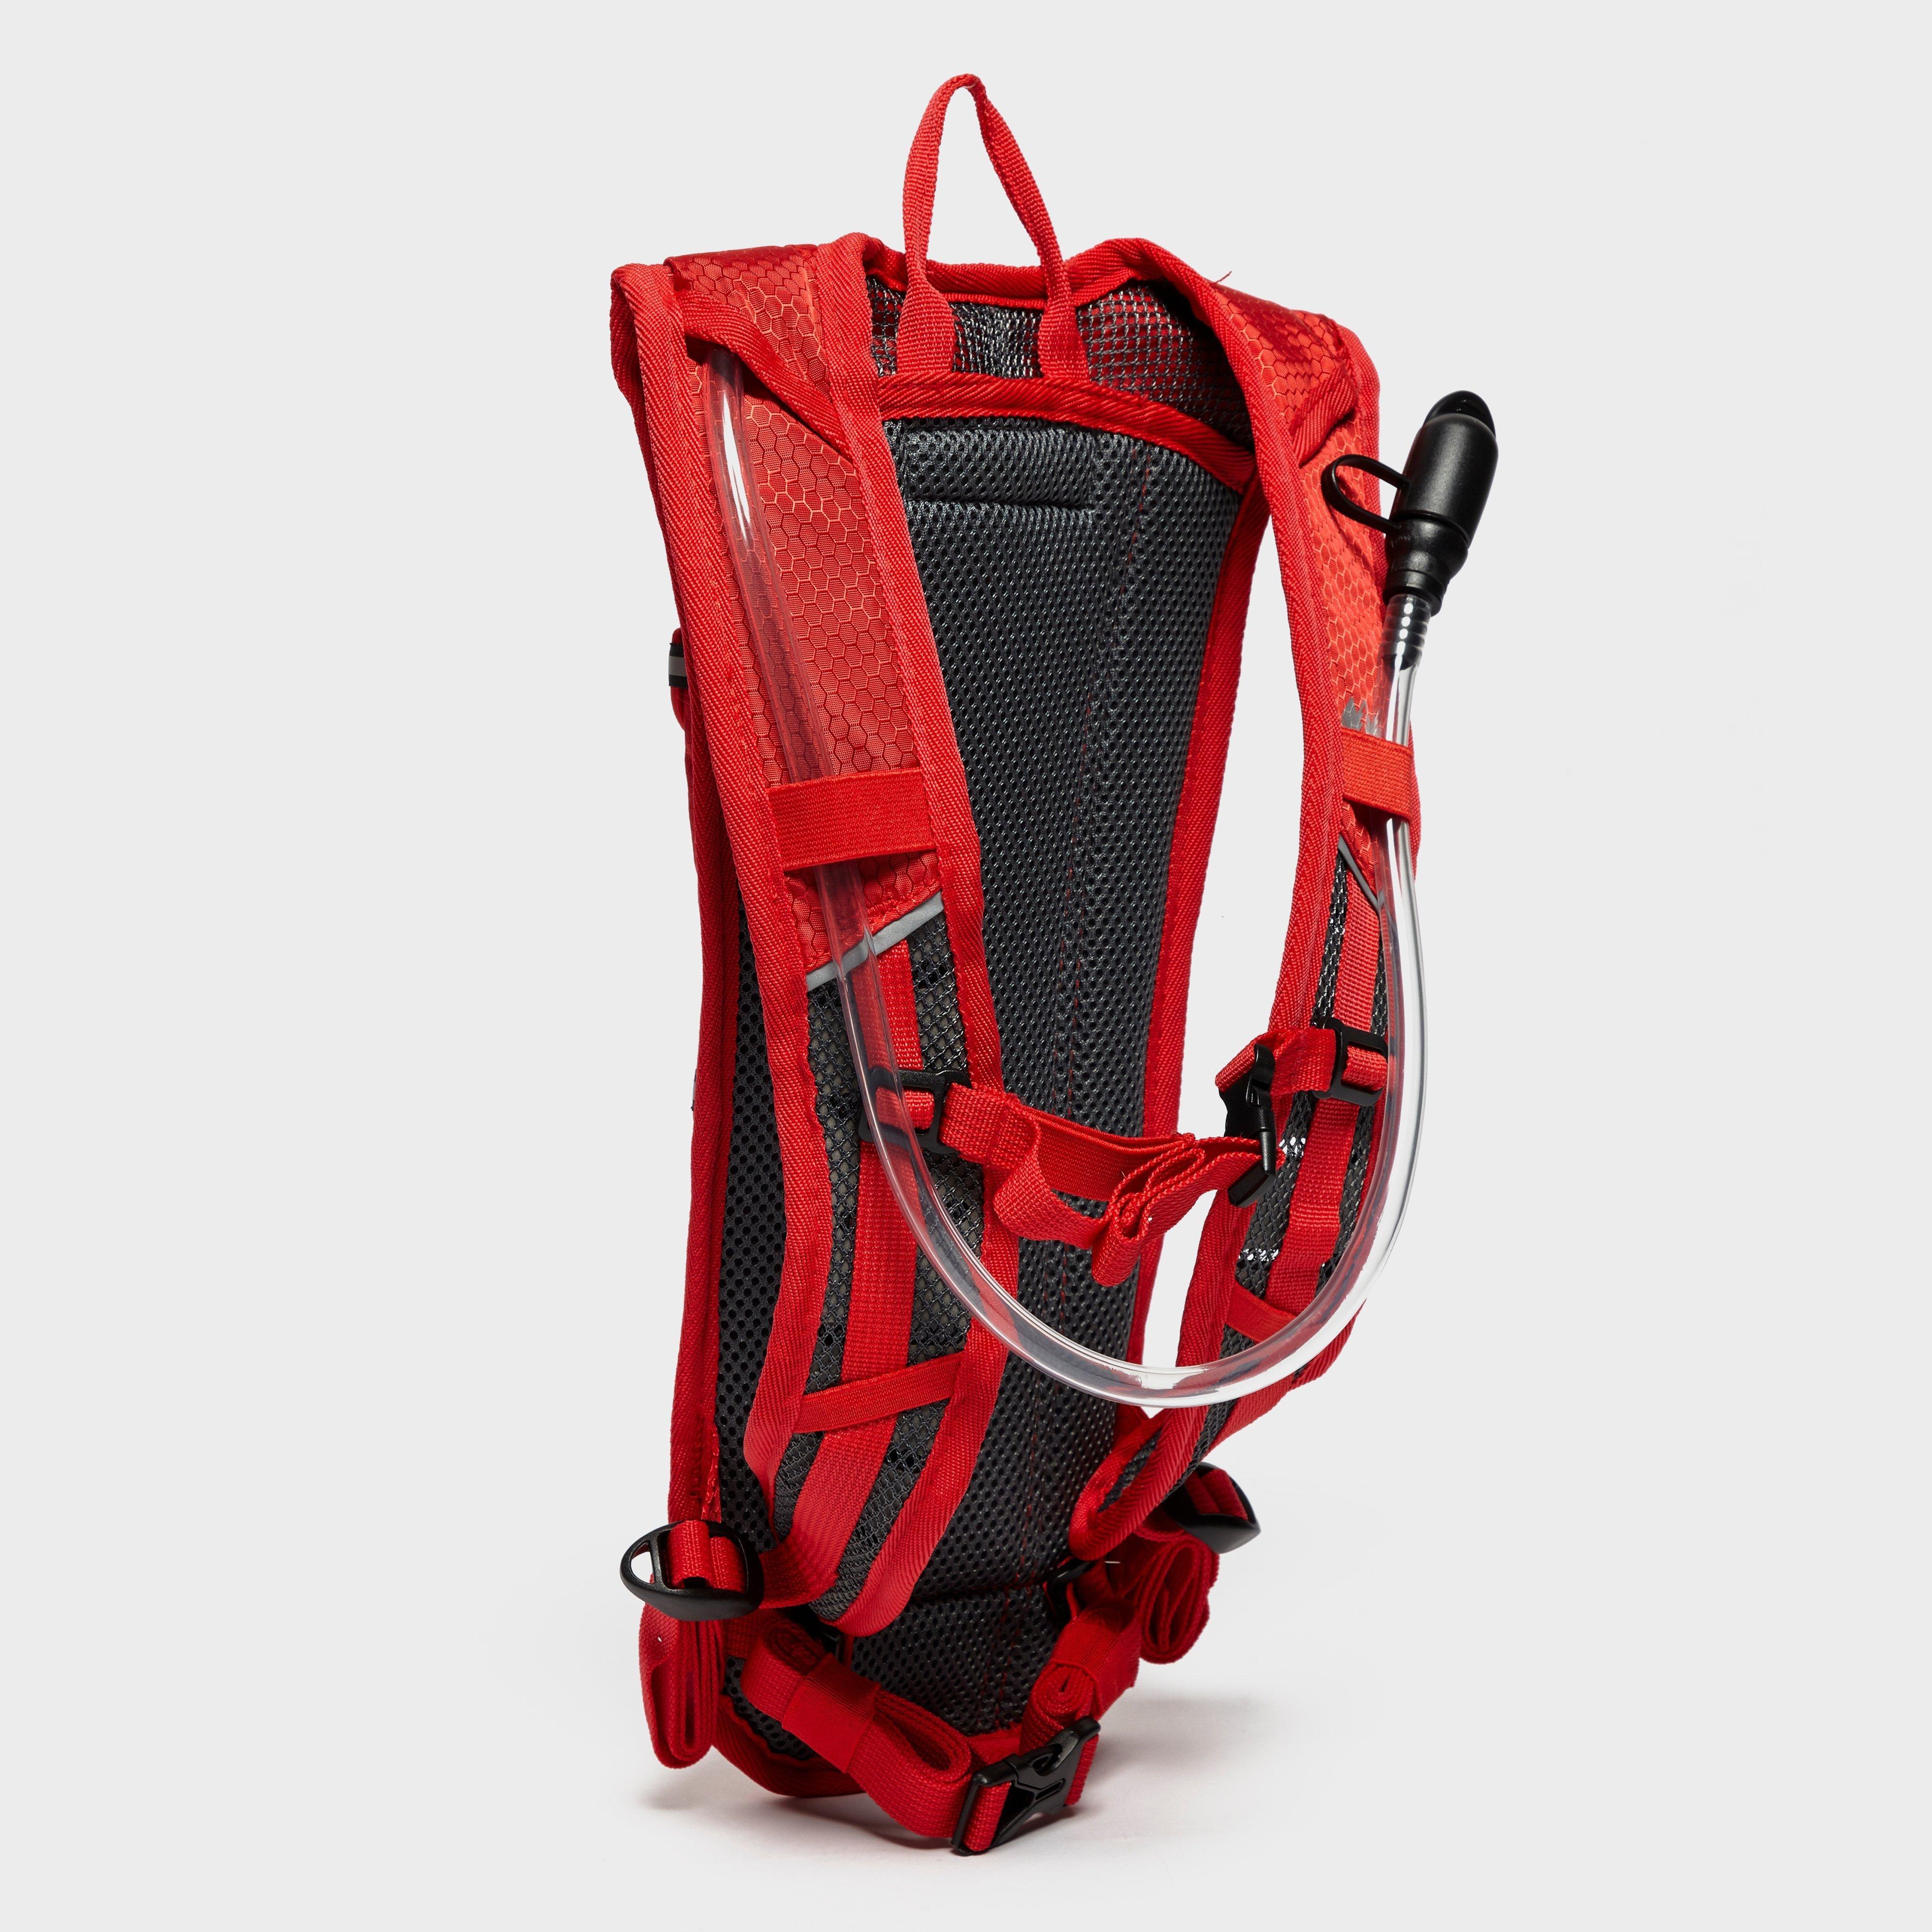 Eurohike Cactus 3L Hydration Pack Review